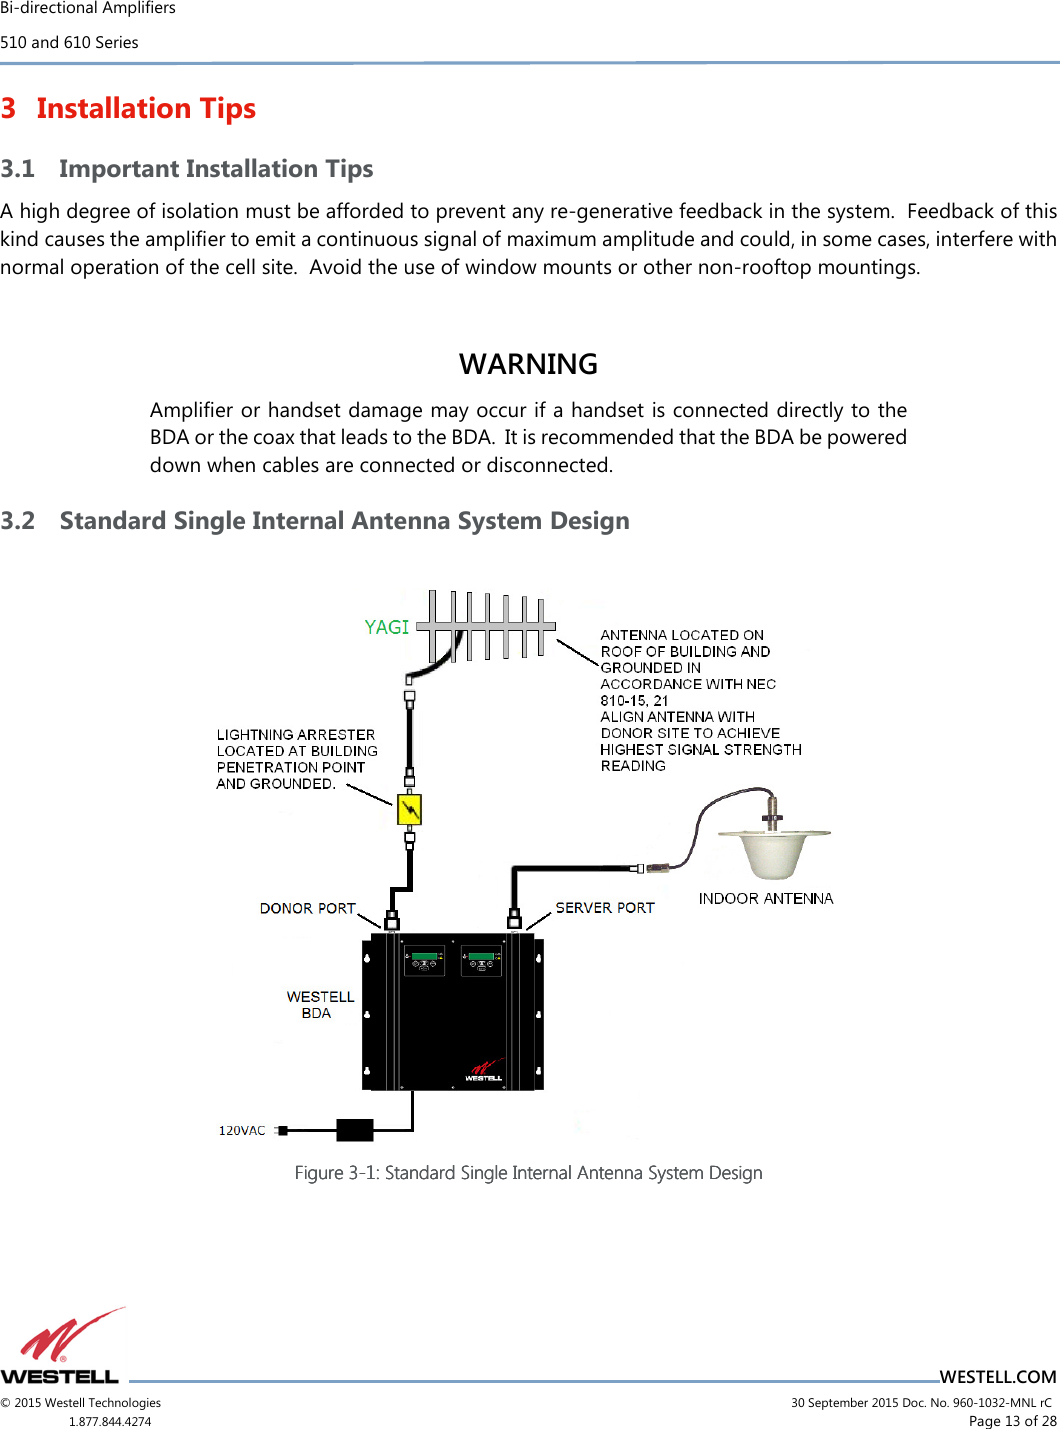 Bi-directional Amplifiers 510 and 610 Series                                    WESTELL.COM © 2015 Westell Technologies                             30 September 2015 Doc. No. 960-1032-MNL rC 1.877.844.4274                     Page 13 of 28  3 Installation Tips 3.1 Important Installation Tips A high degree of isolation must be afforded to prevent any re-generative feedback in the system.  Feedback of this kind causes the ampliﬁer to emit a continuous signal of maximum amplitude and could, in some cases, interfere with normal operation of the cell site.  Avoid the use of window mounts or other non-rooftop mountings.   WARNING Ampliﬁer or handset damage may occur if a handset is connected directly to the BDA or the coax that leads to the BDA.  It is recommended that the BDA be powered down when cables are connected or disconnected.   3.2 Standard Single Internal Antenna System Design   Figure Figure Figure Figure 3333----1111: Standard Single Internal Antenna System Design: Standard Single Internal Antenna System Design: Standard Single Internal Antenna System Design: Standard Single Internal Antenna System Design             